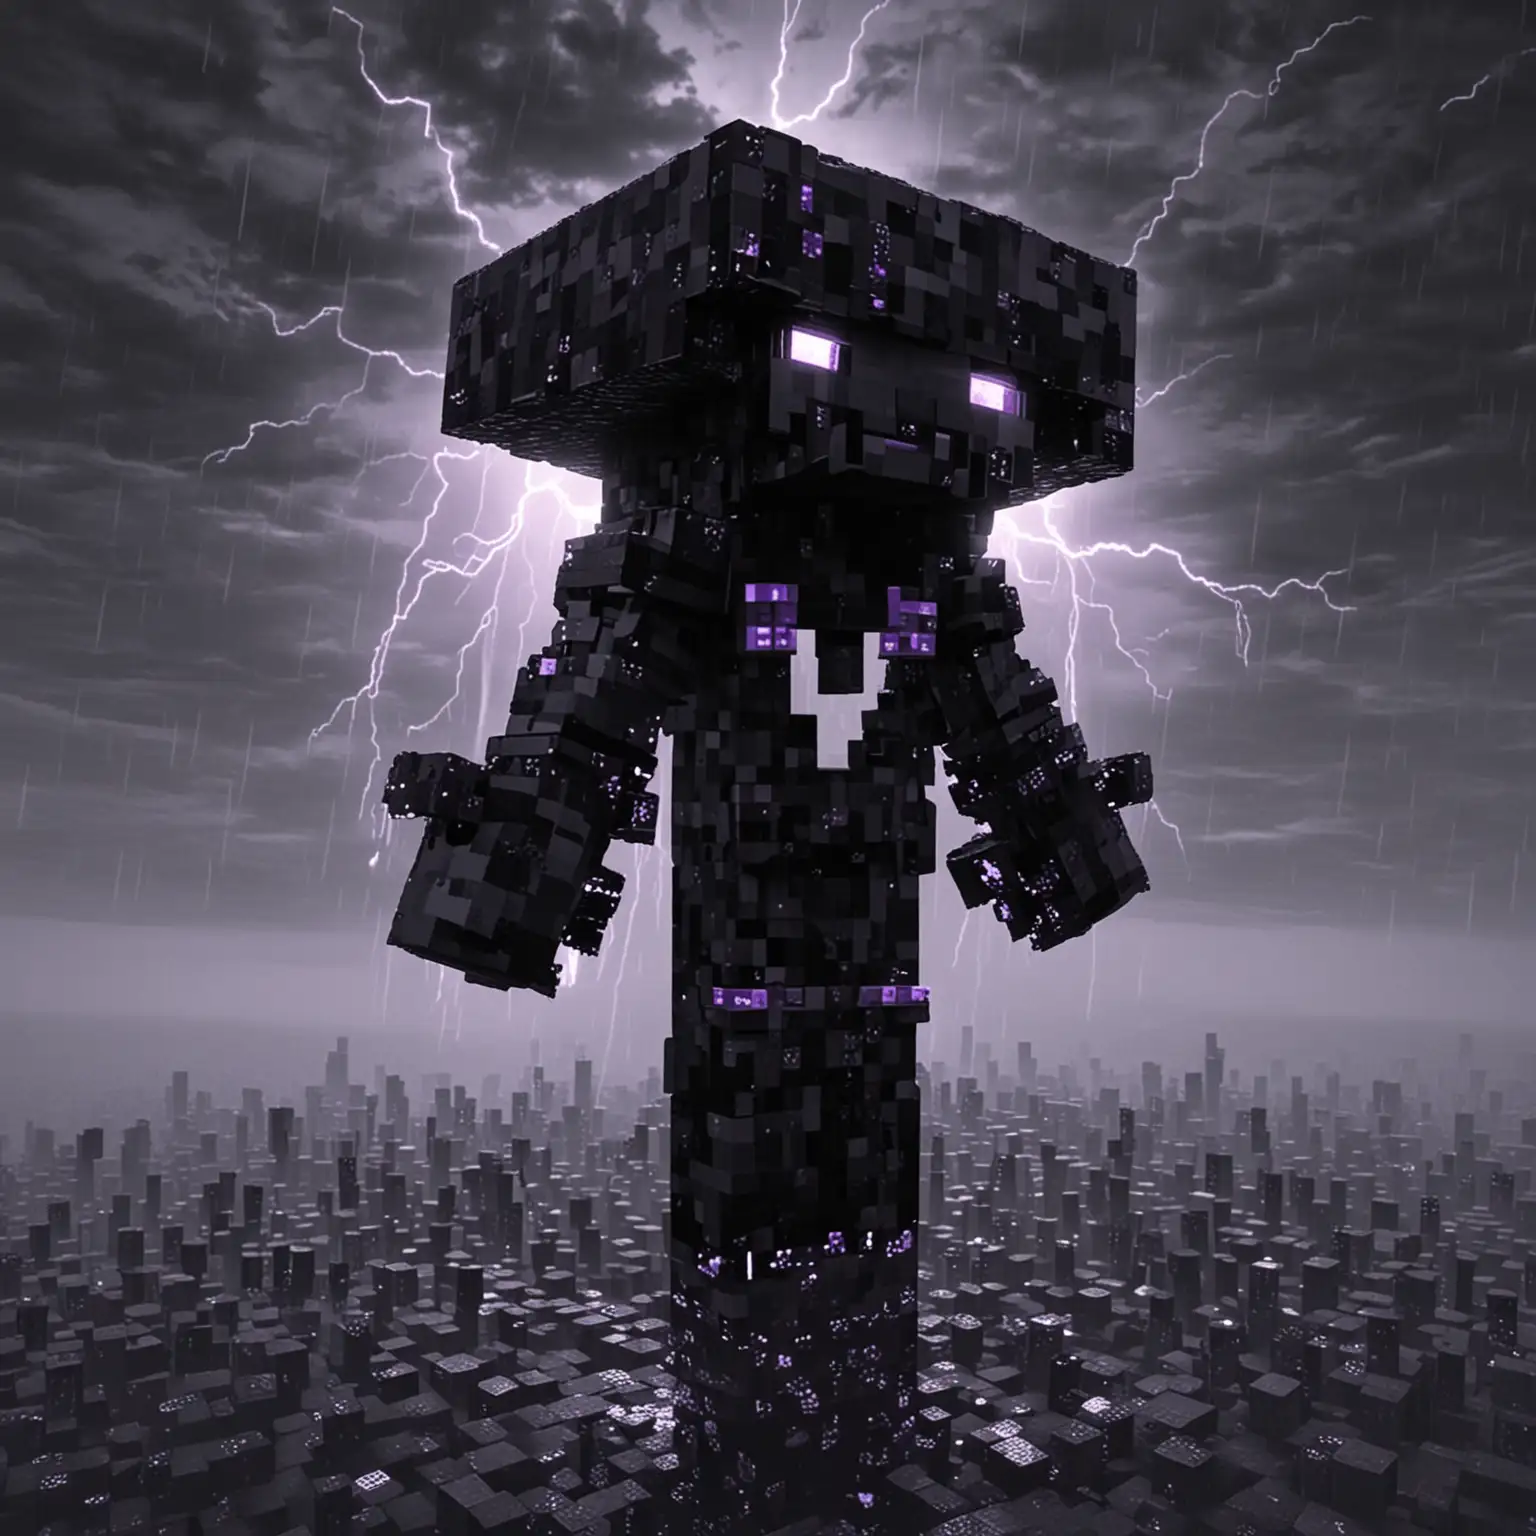 Epic Battle Against the Black Minecraft Wither Storm